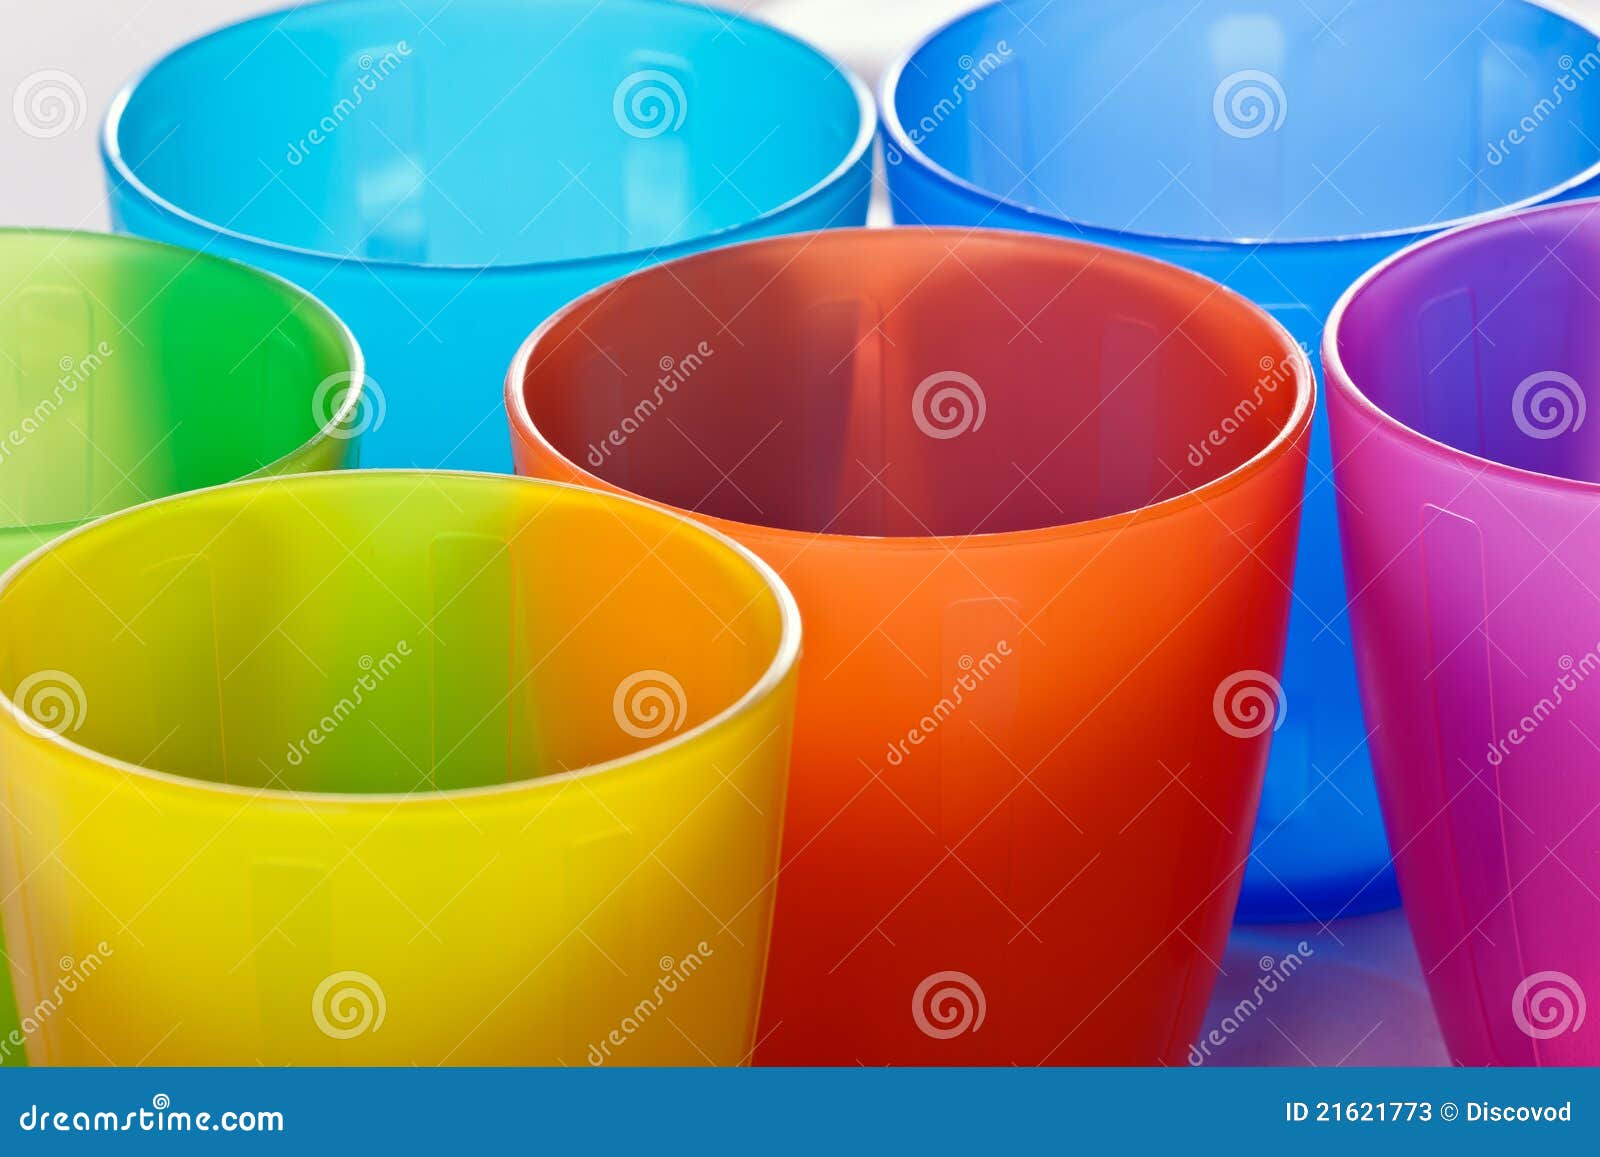 Colored plastic cups stock image. Image of drinking